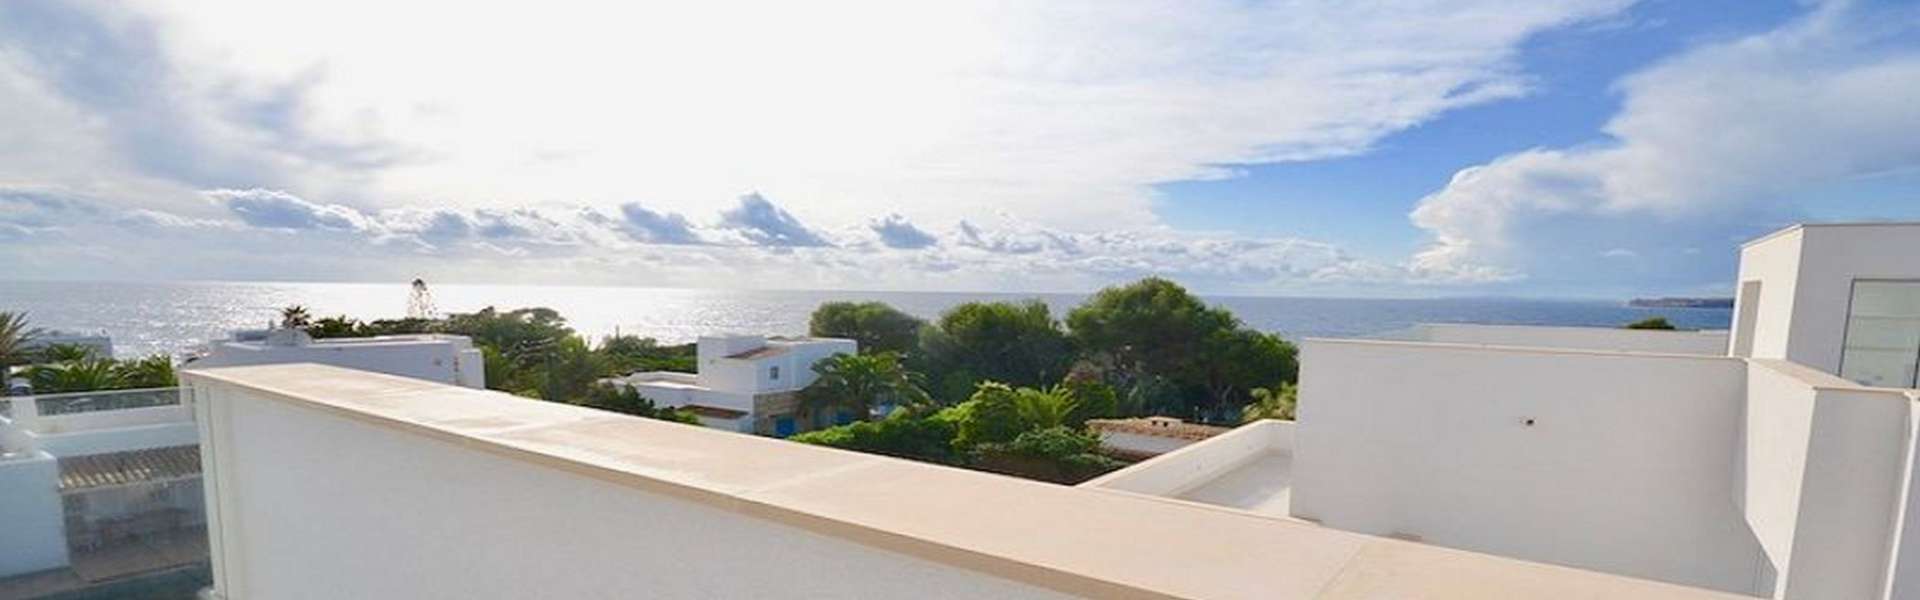 Cala d'Or - Luxury new built villa with stunning views in Punta des Port/Cala Egos